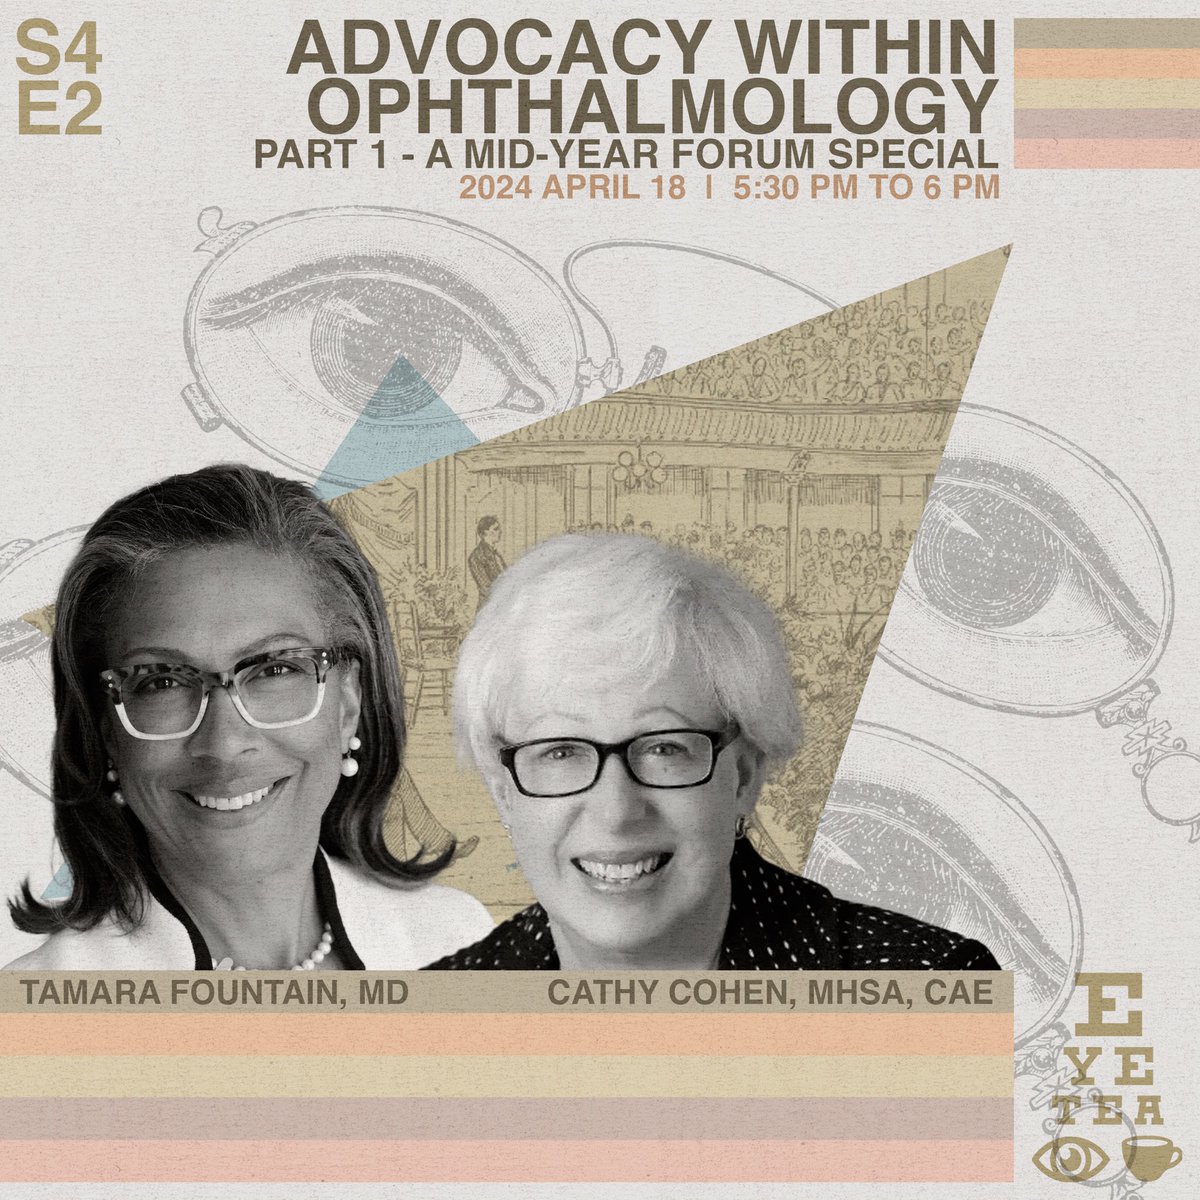 Kicking off a special two-part series on Advocacy within Ophthalmology! Join us for Part 1 with Dr. Tamara Fountain and Cathy Cohen on April 18th at 5:30PM EST!! Register here: us06web.zoom.us/meeting/regist…